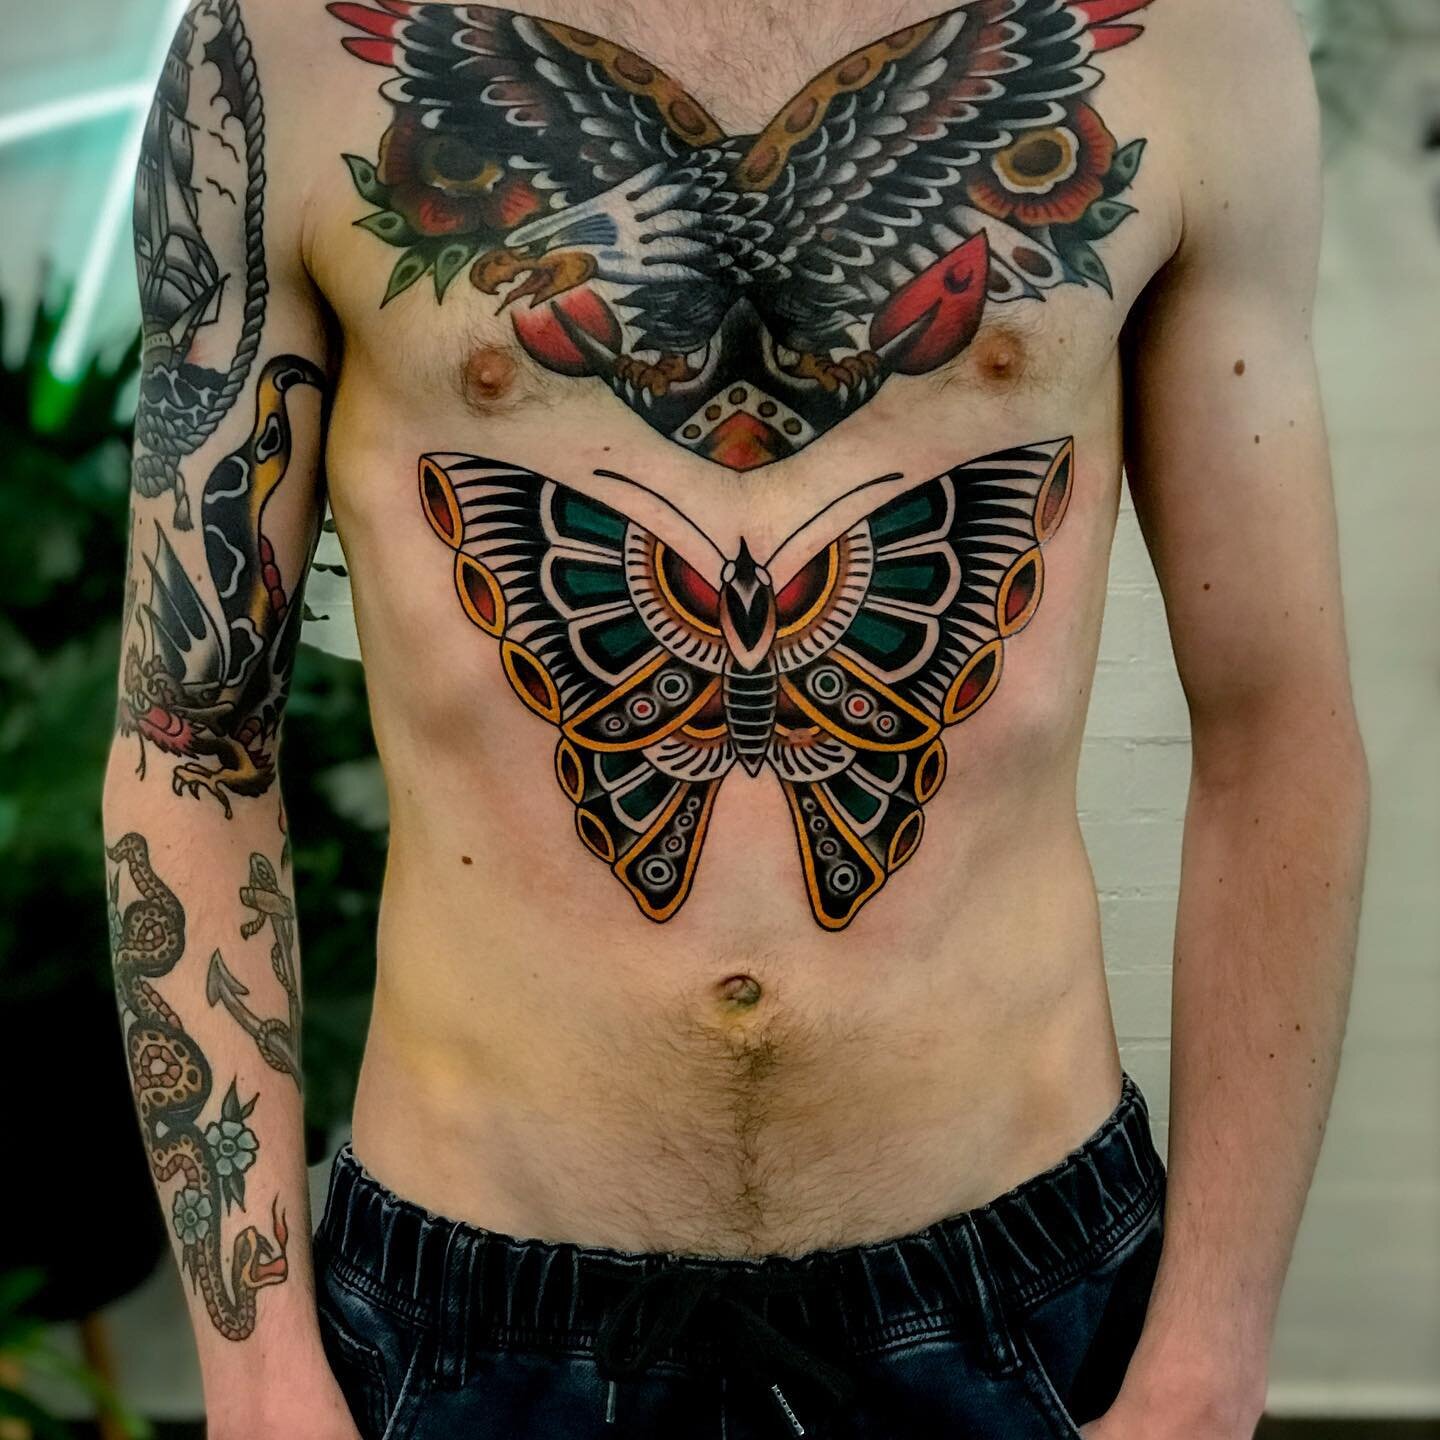 I got to do this #christianwarlich butterfly on @gordo_greens tummykins a little while back. You crushed it man, super tough 💪💪 Sorry, I can&rsquo;t remember who did that eagle!
.
.
.
#Inkcultr #boldwillhold #americanatattoos #classictattoos #boldt